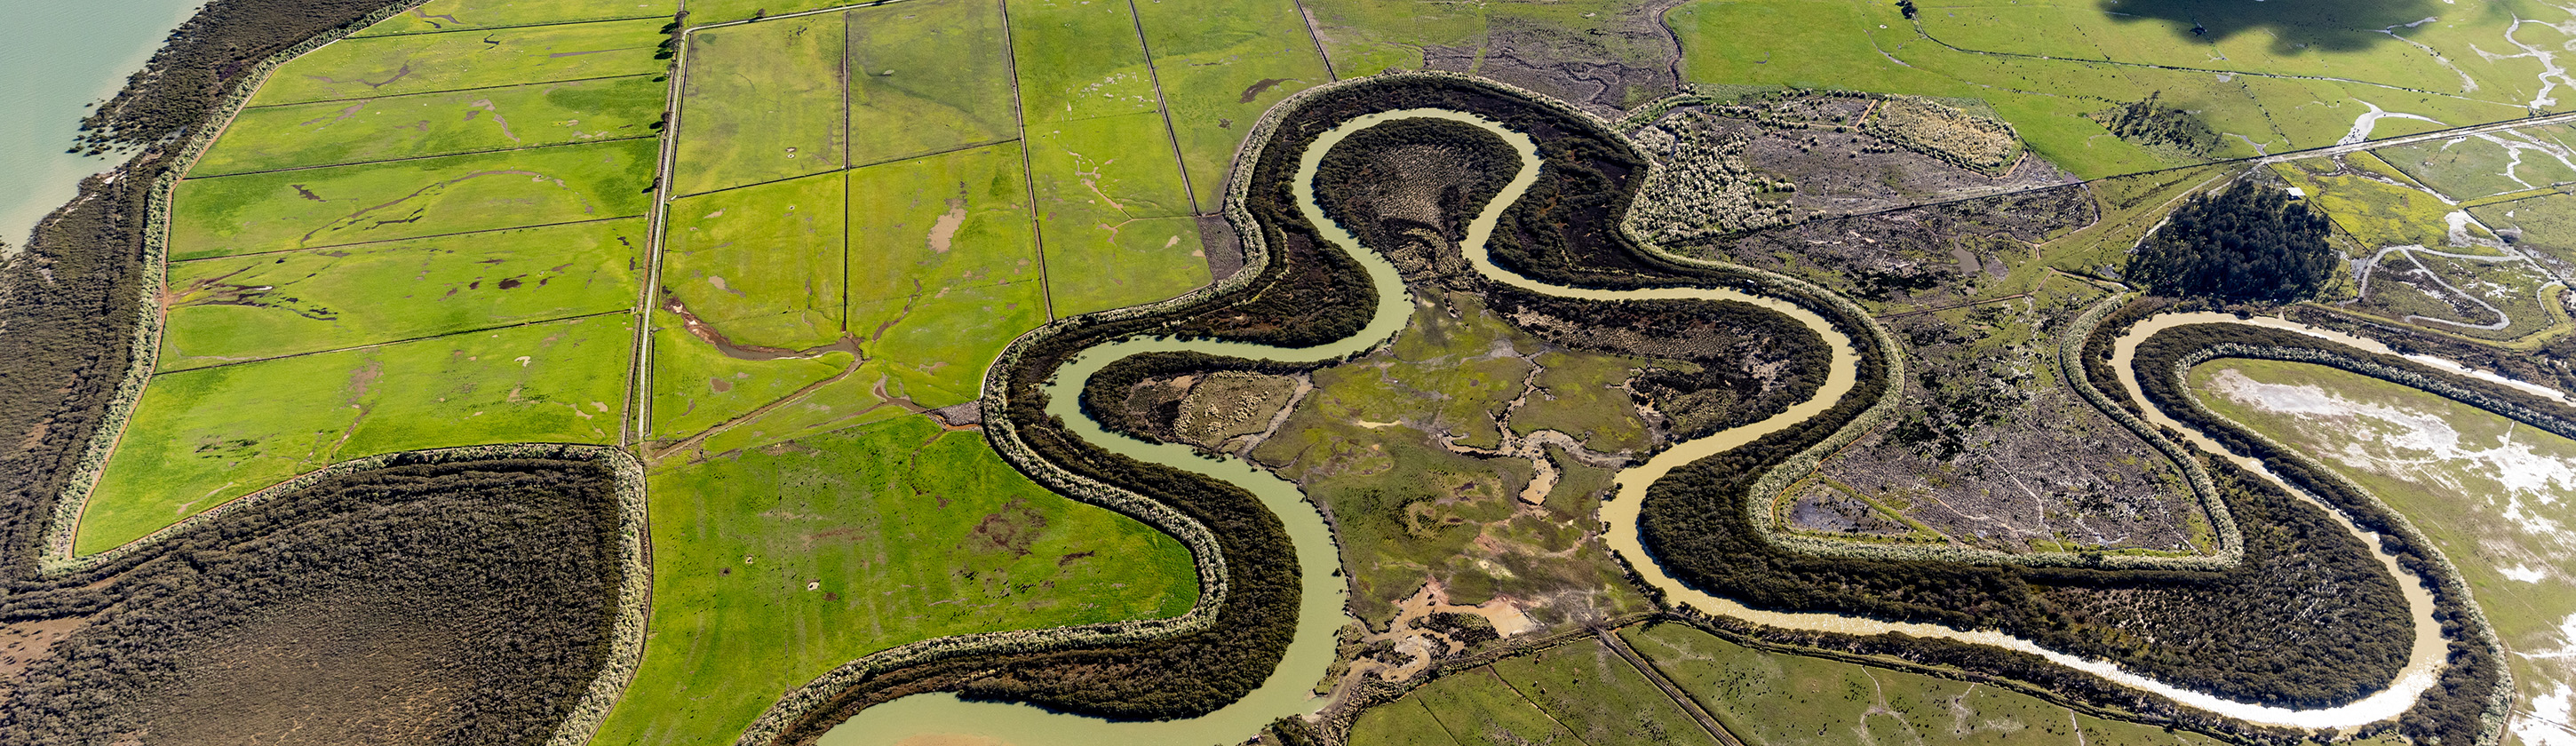 Aerial view showing part of the Kaipara District. You can see the tension between nature, farming and the conservation work carried out by locals. The Arapārera River winds through lush green pasture. Intensive planting and mangroves growing along its edges stop sediment and nutrient-rich run-off entering the waterway. The unique  pattern created by the river shows the beauty of a natural system, allowed to flow without human interference.